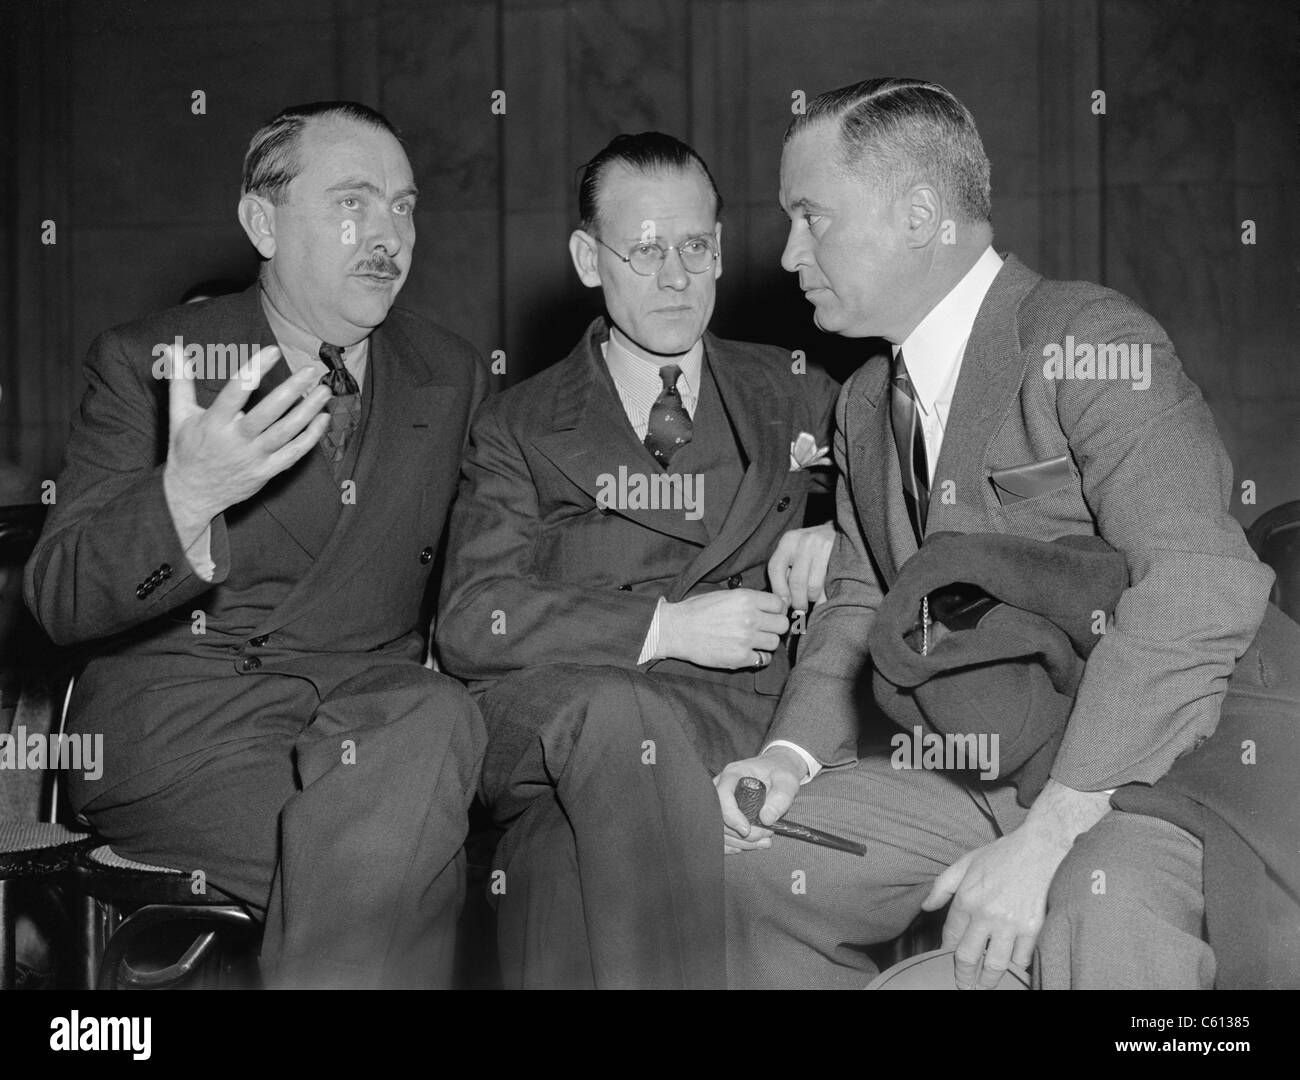 American television inventor, Philo T. Farnsworth testified to a Congressional committee about the difficulties in getting patents. Farnsworth is seated between George Everson, Secretary of Farnsworth Television, Inc. and Richard C. Patterson, Jr., Assistant Secretary of Commerce. January 1939. Stock Photo